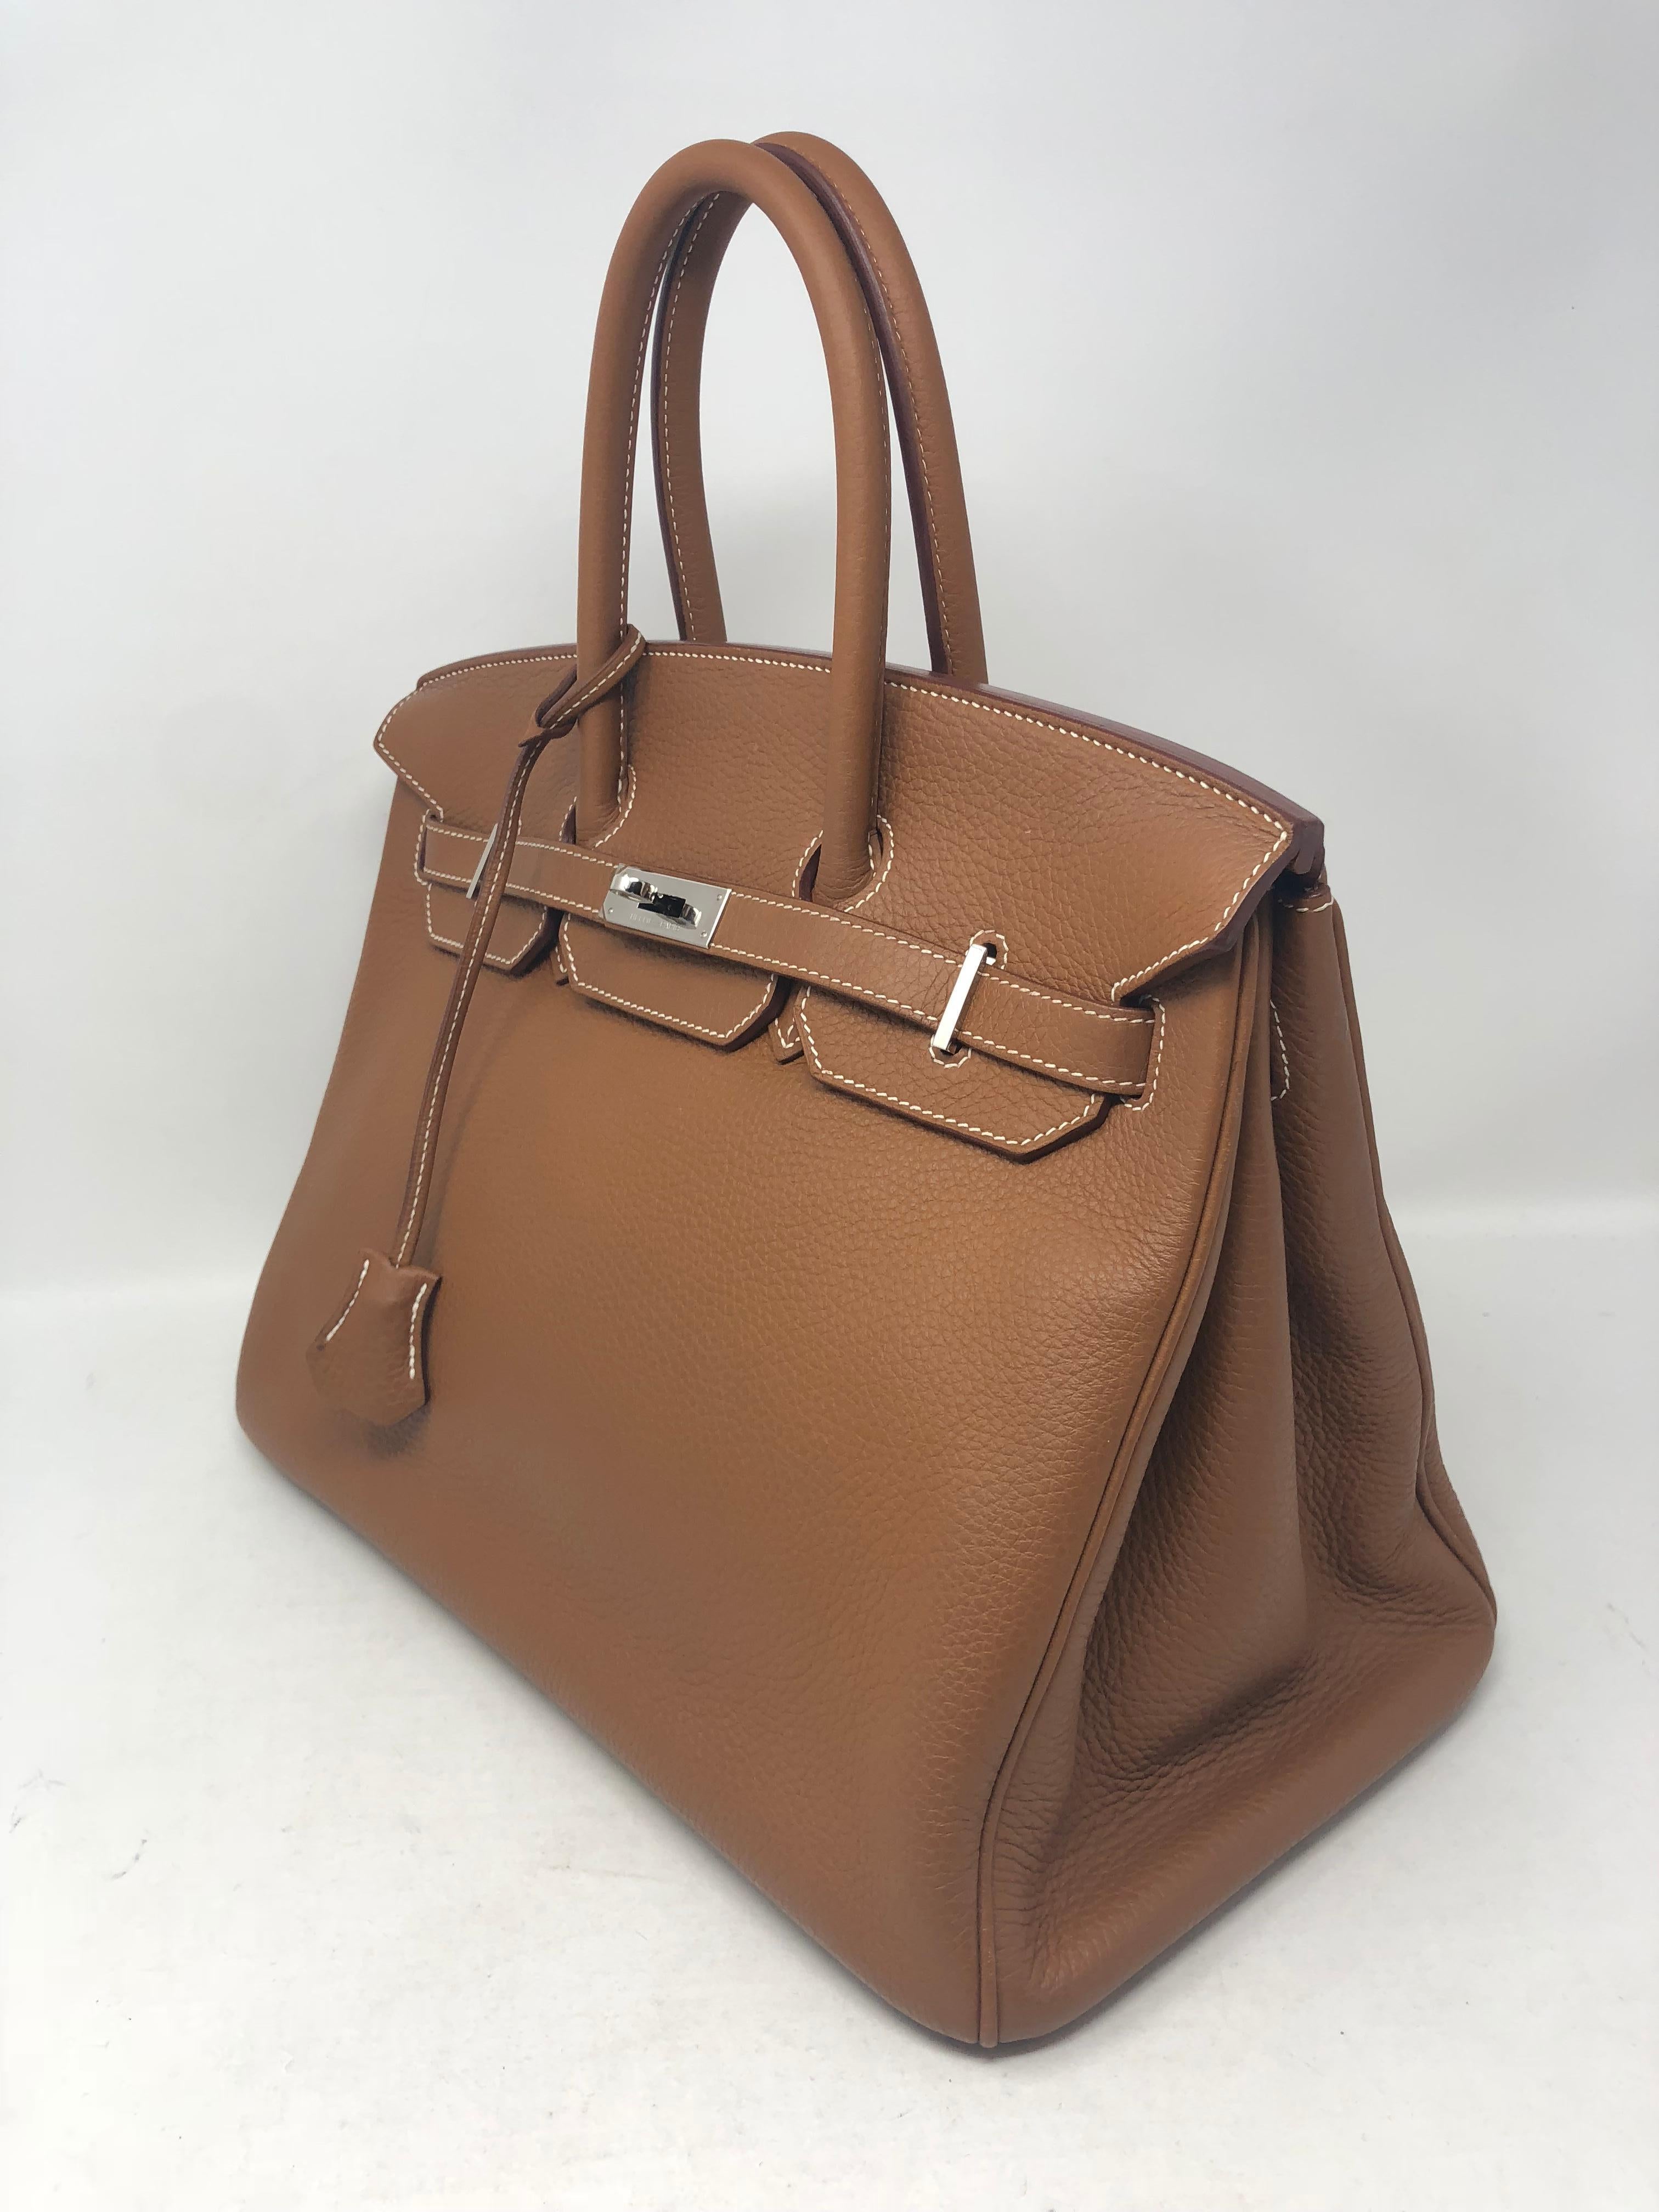 Hermes Birkin 35 Gold Color with Palladium hardware. Beautiful condition. Like new never used. The best neutral color and Hermes color. Highlt coveted and perfect size. Comes with clochette, lock and keys. Don't miss out on this one. Guaranteed